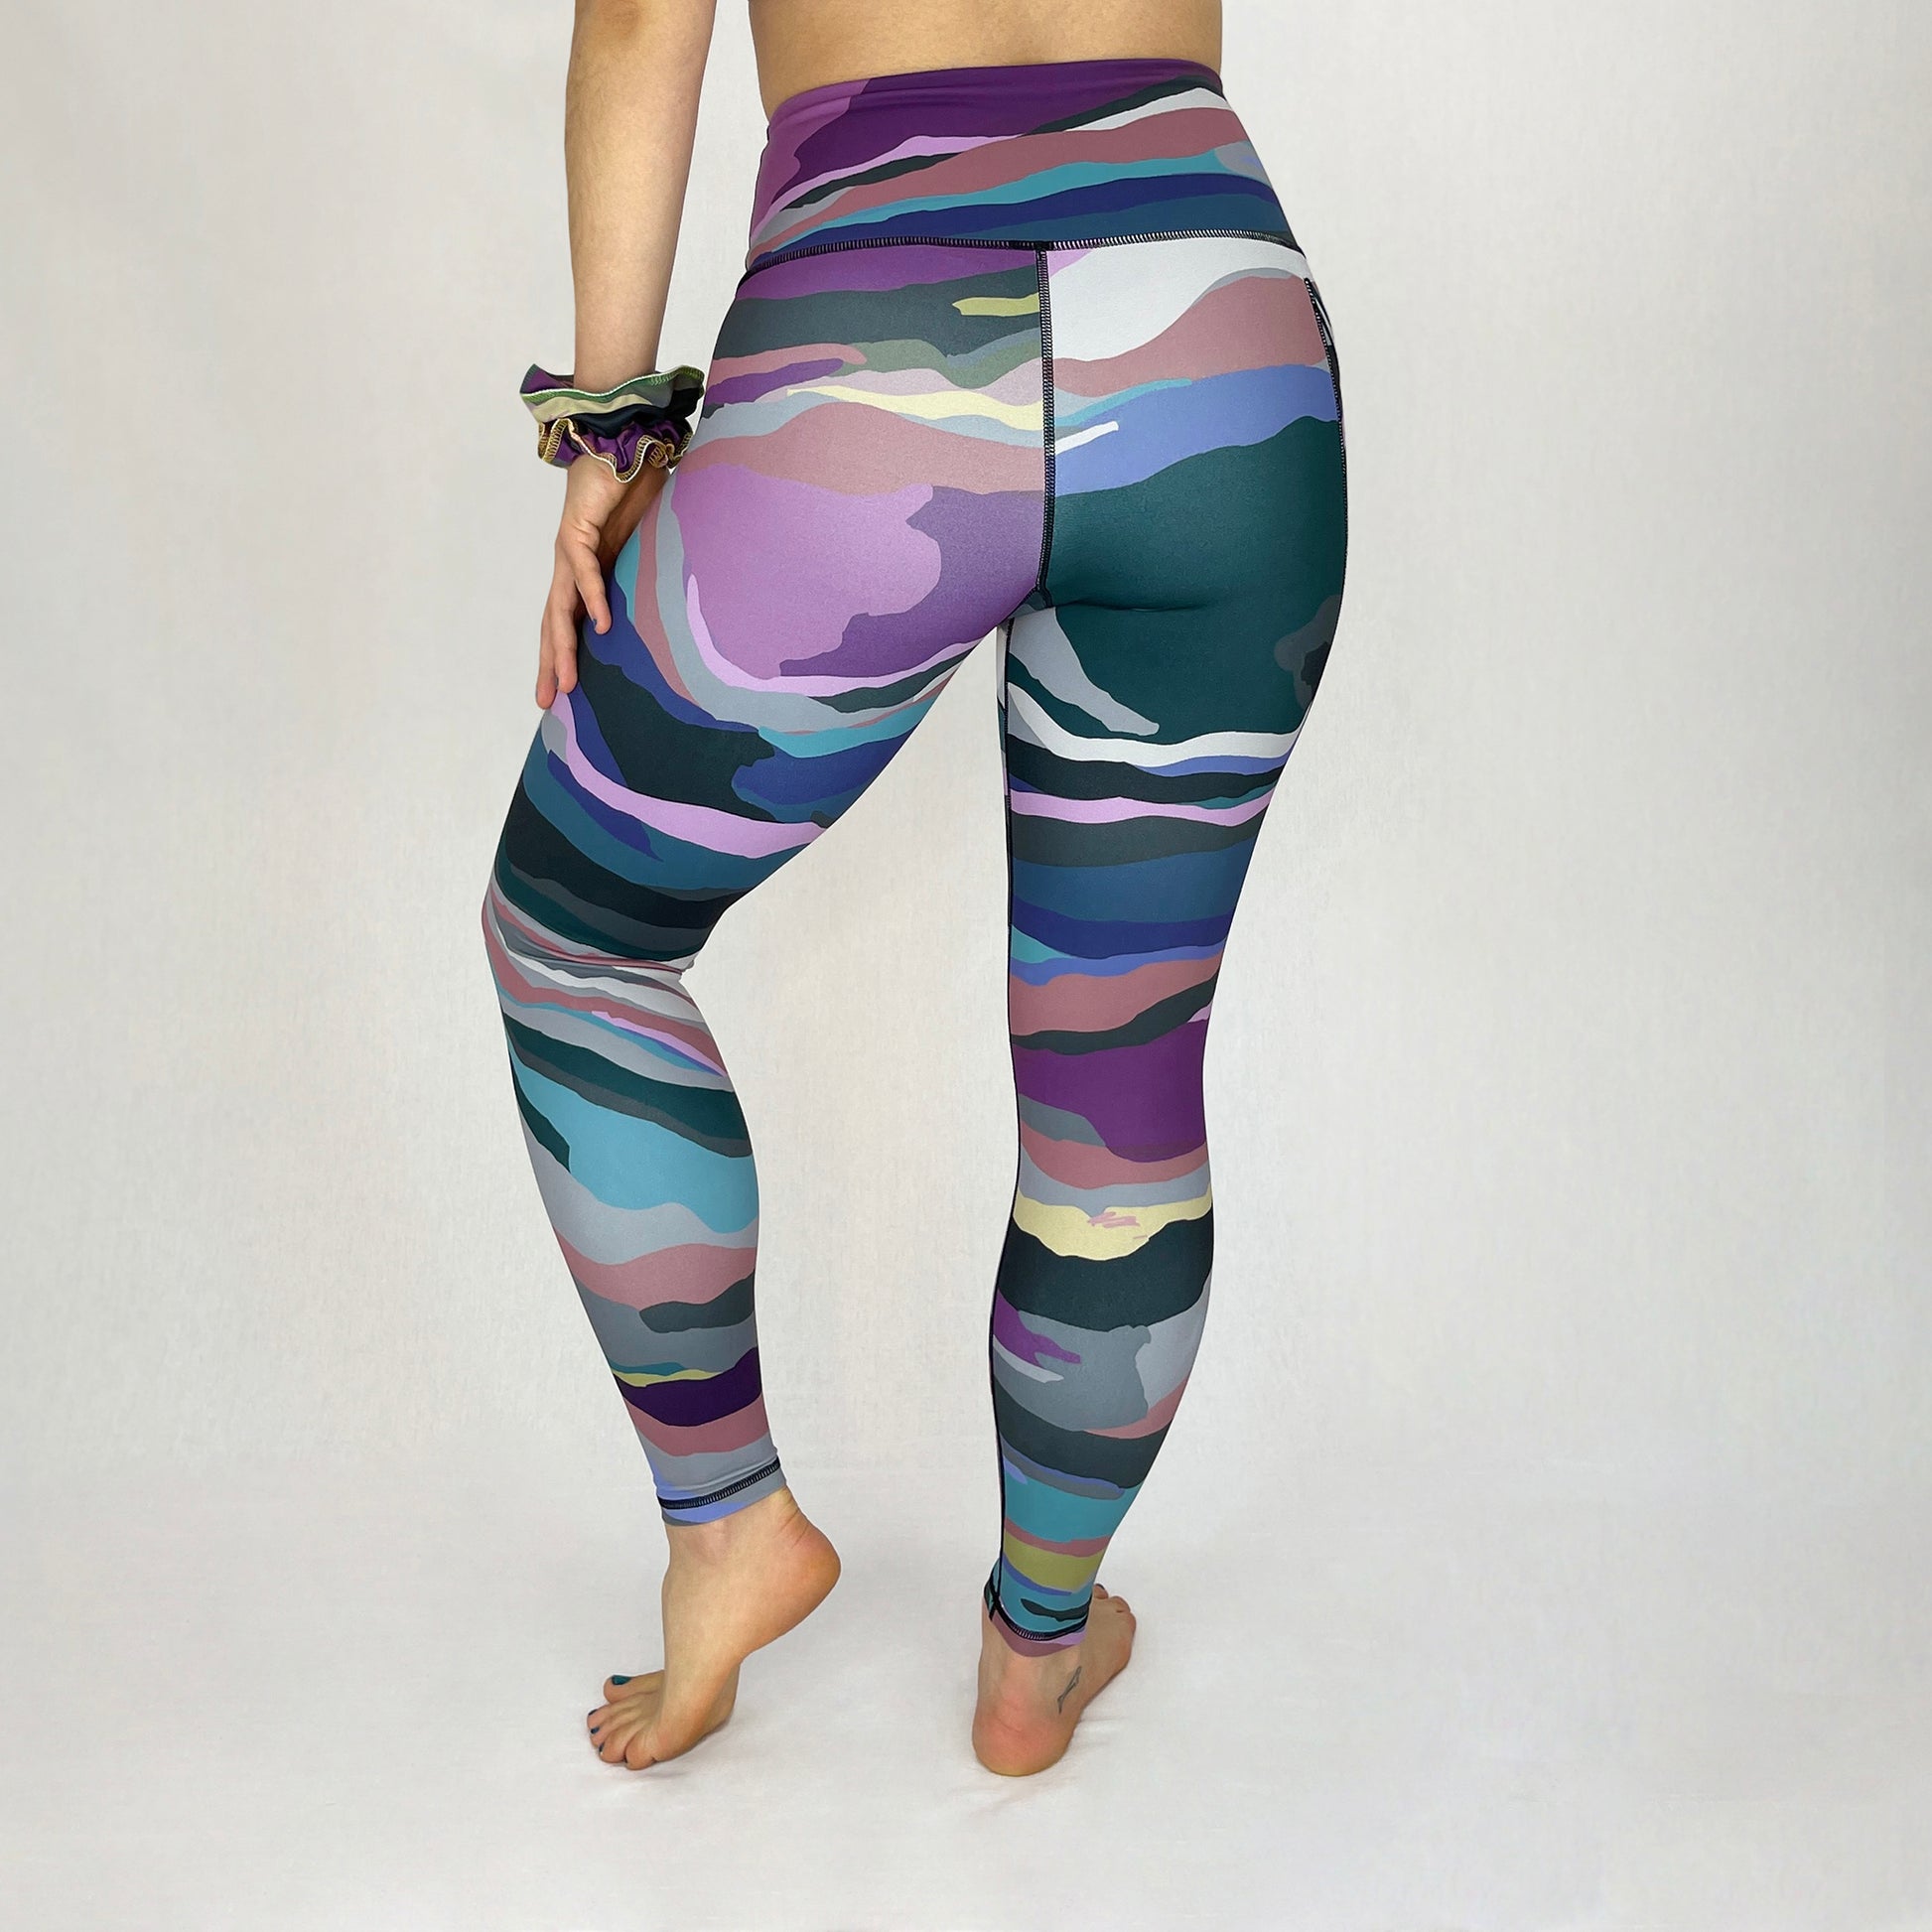 colourful high rise leggings with pockets made sustainably from recycled materials - purple camouflage back